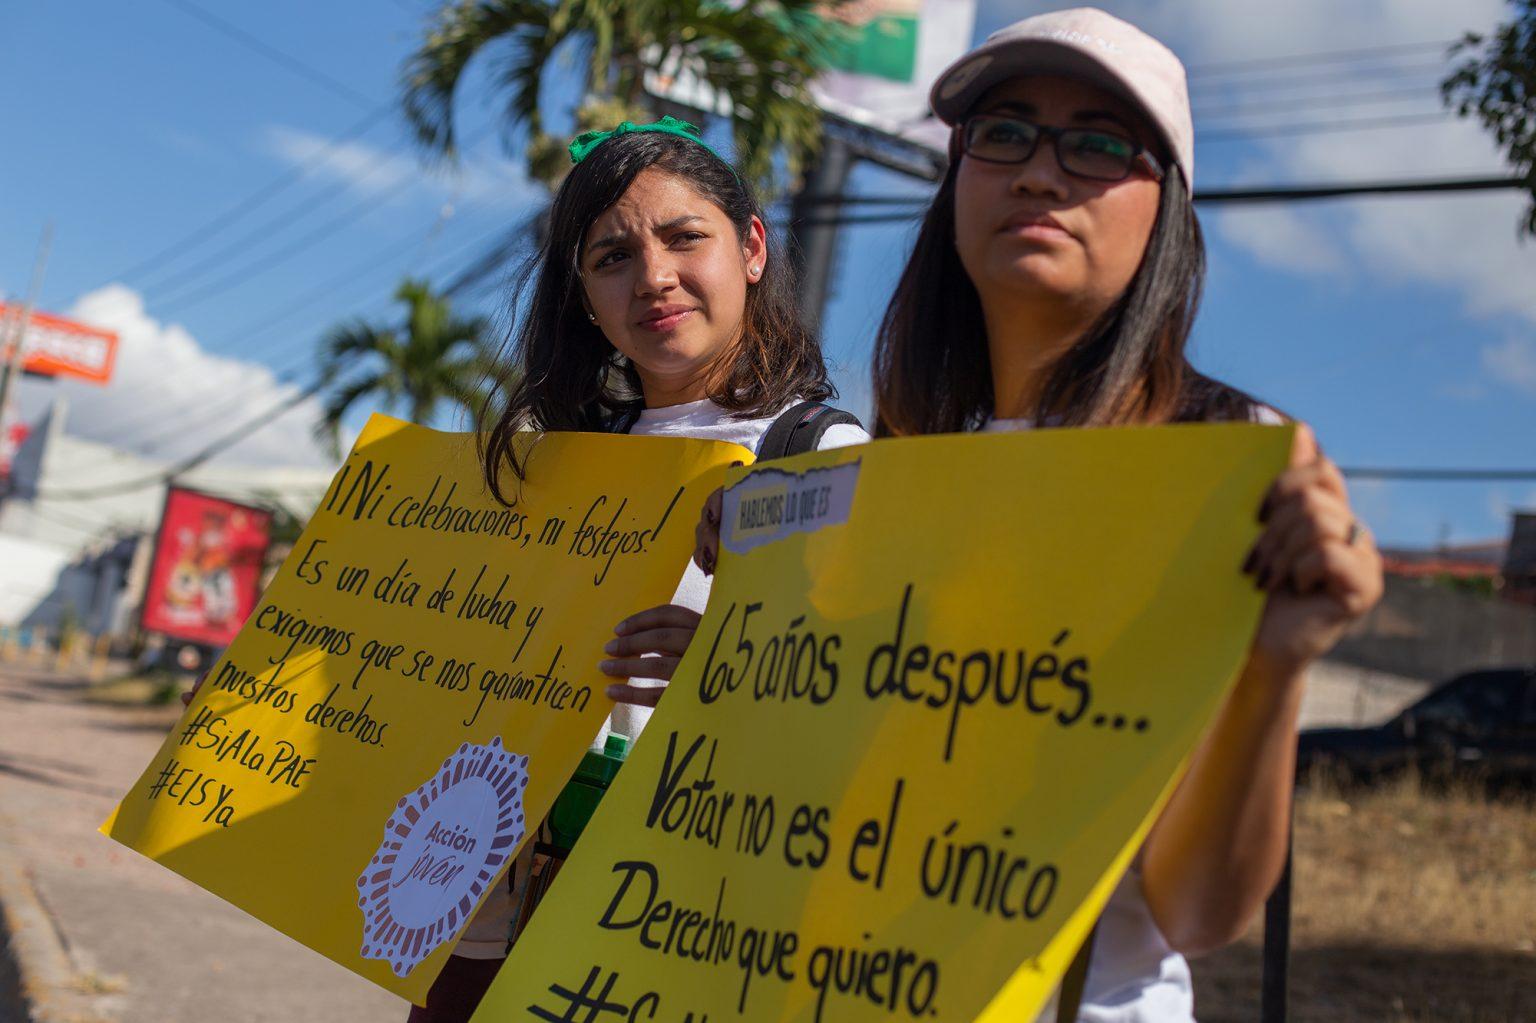 Two young women hold posters referencing defense of women’s sexual and reproductive rights and the decriminalization of the emergency contraceptive pill. Tegucigalpa, January 24, 2020. Photo by: Martín Cálix.